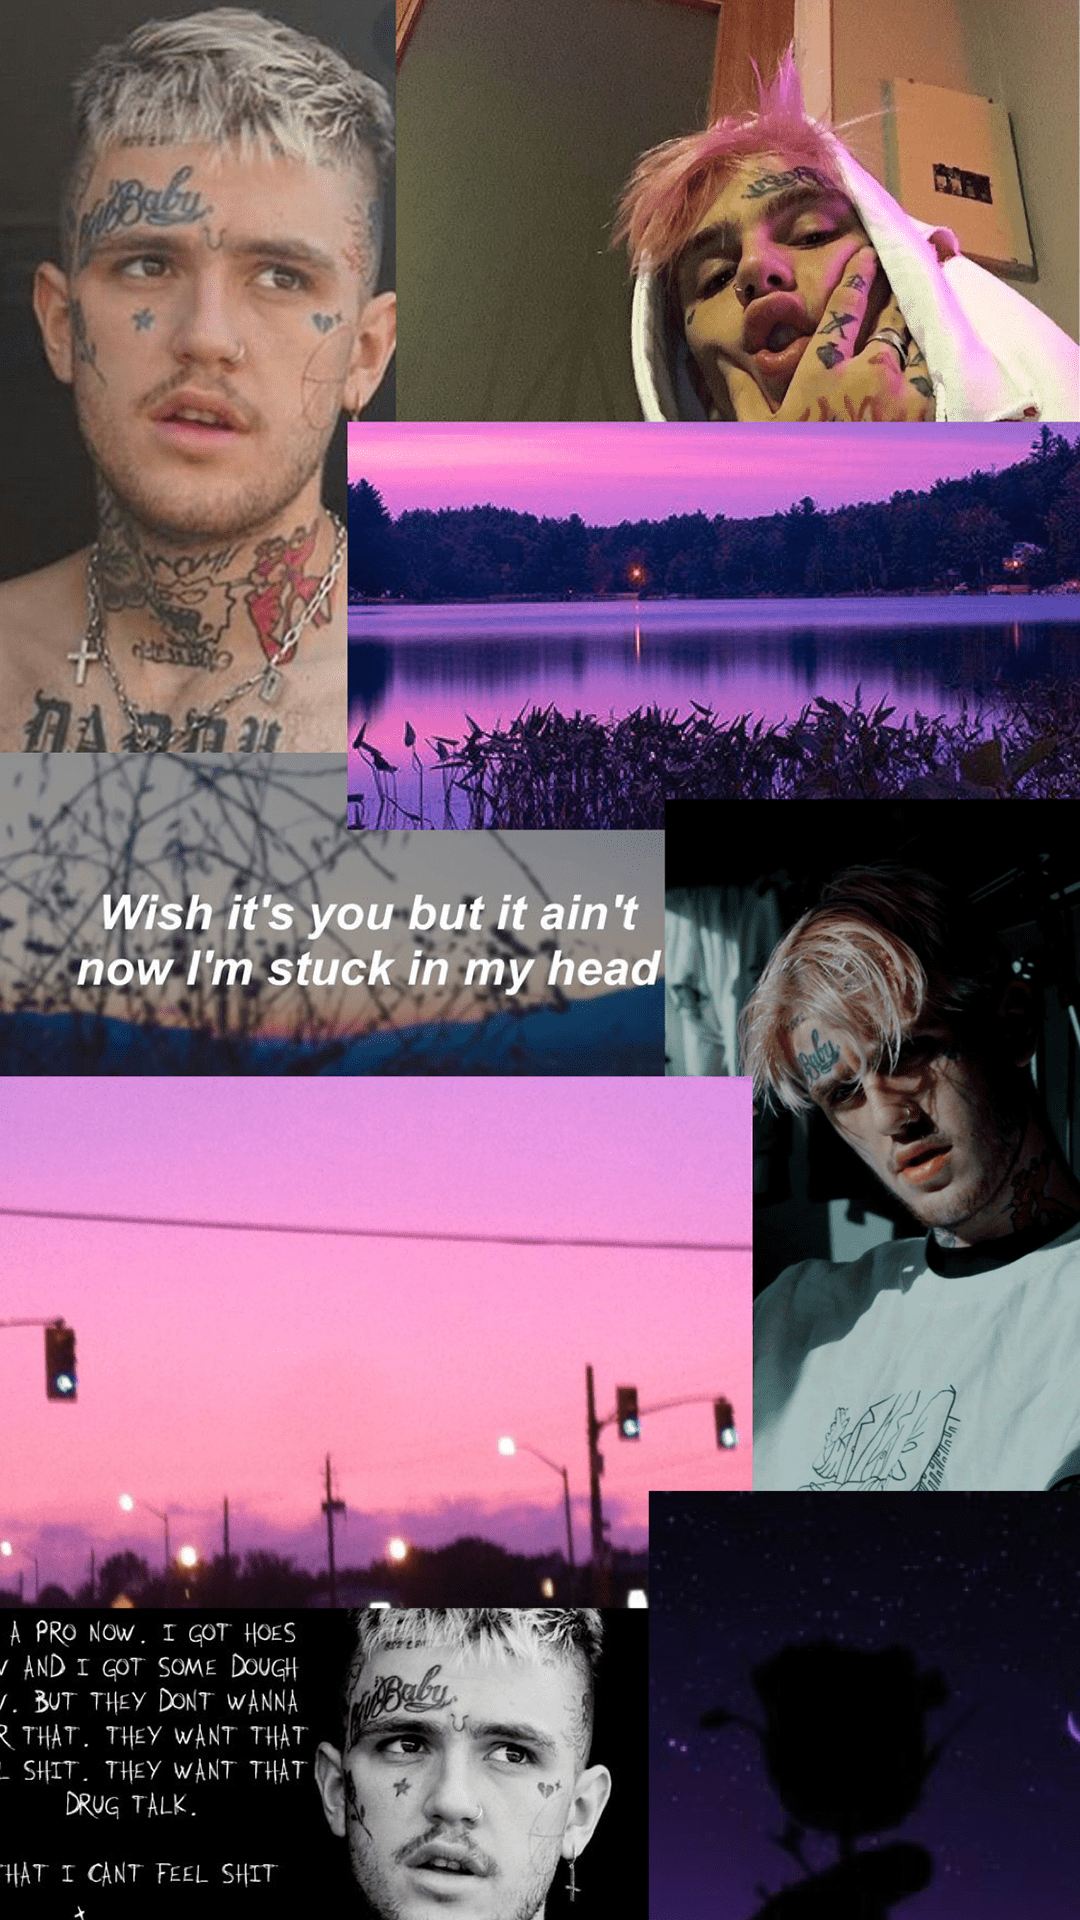 A collage of Lil Peep pictures with the lyrics from his song 